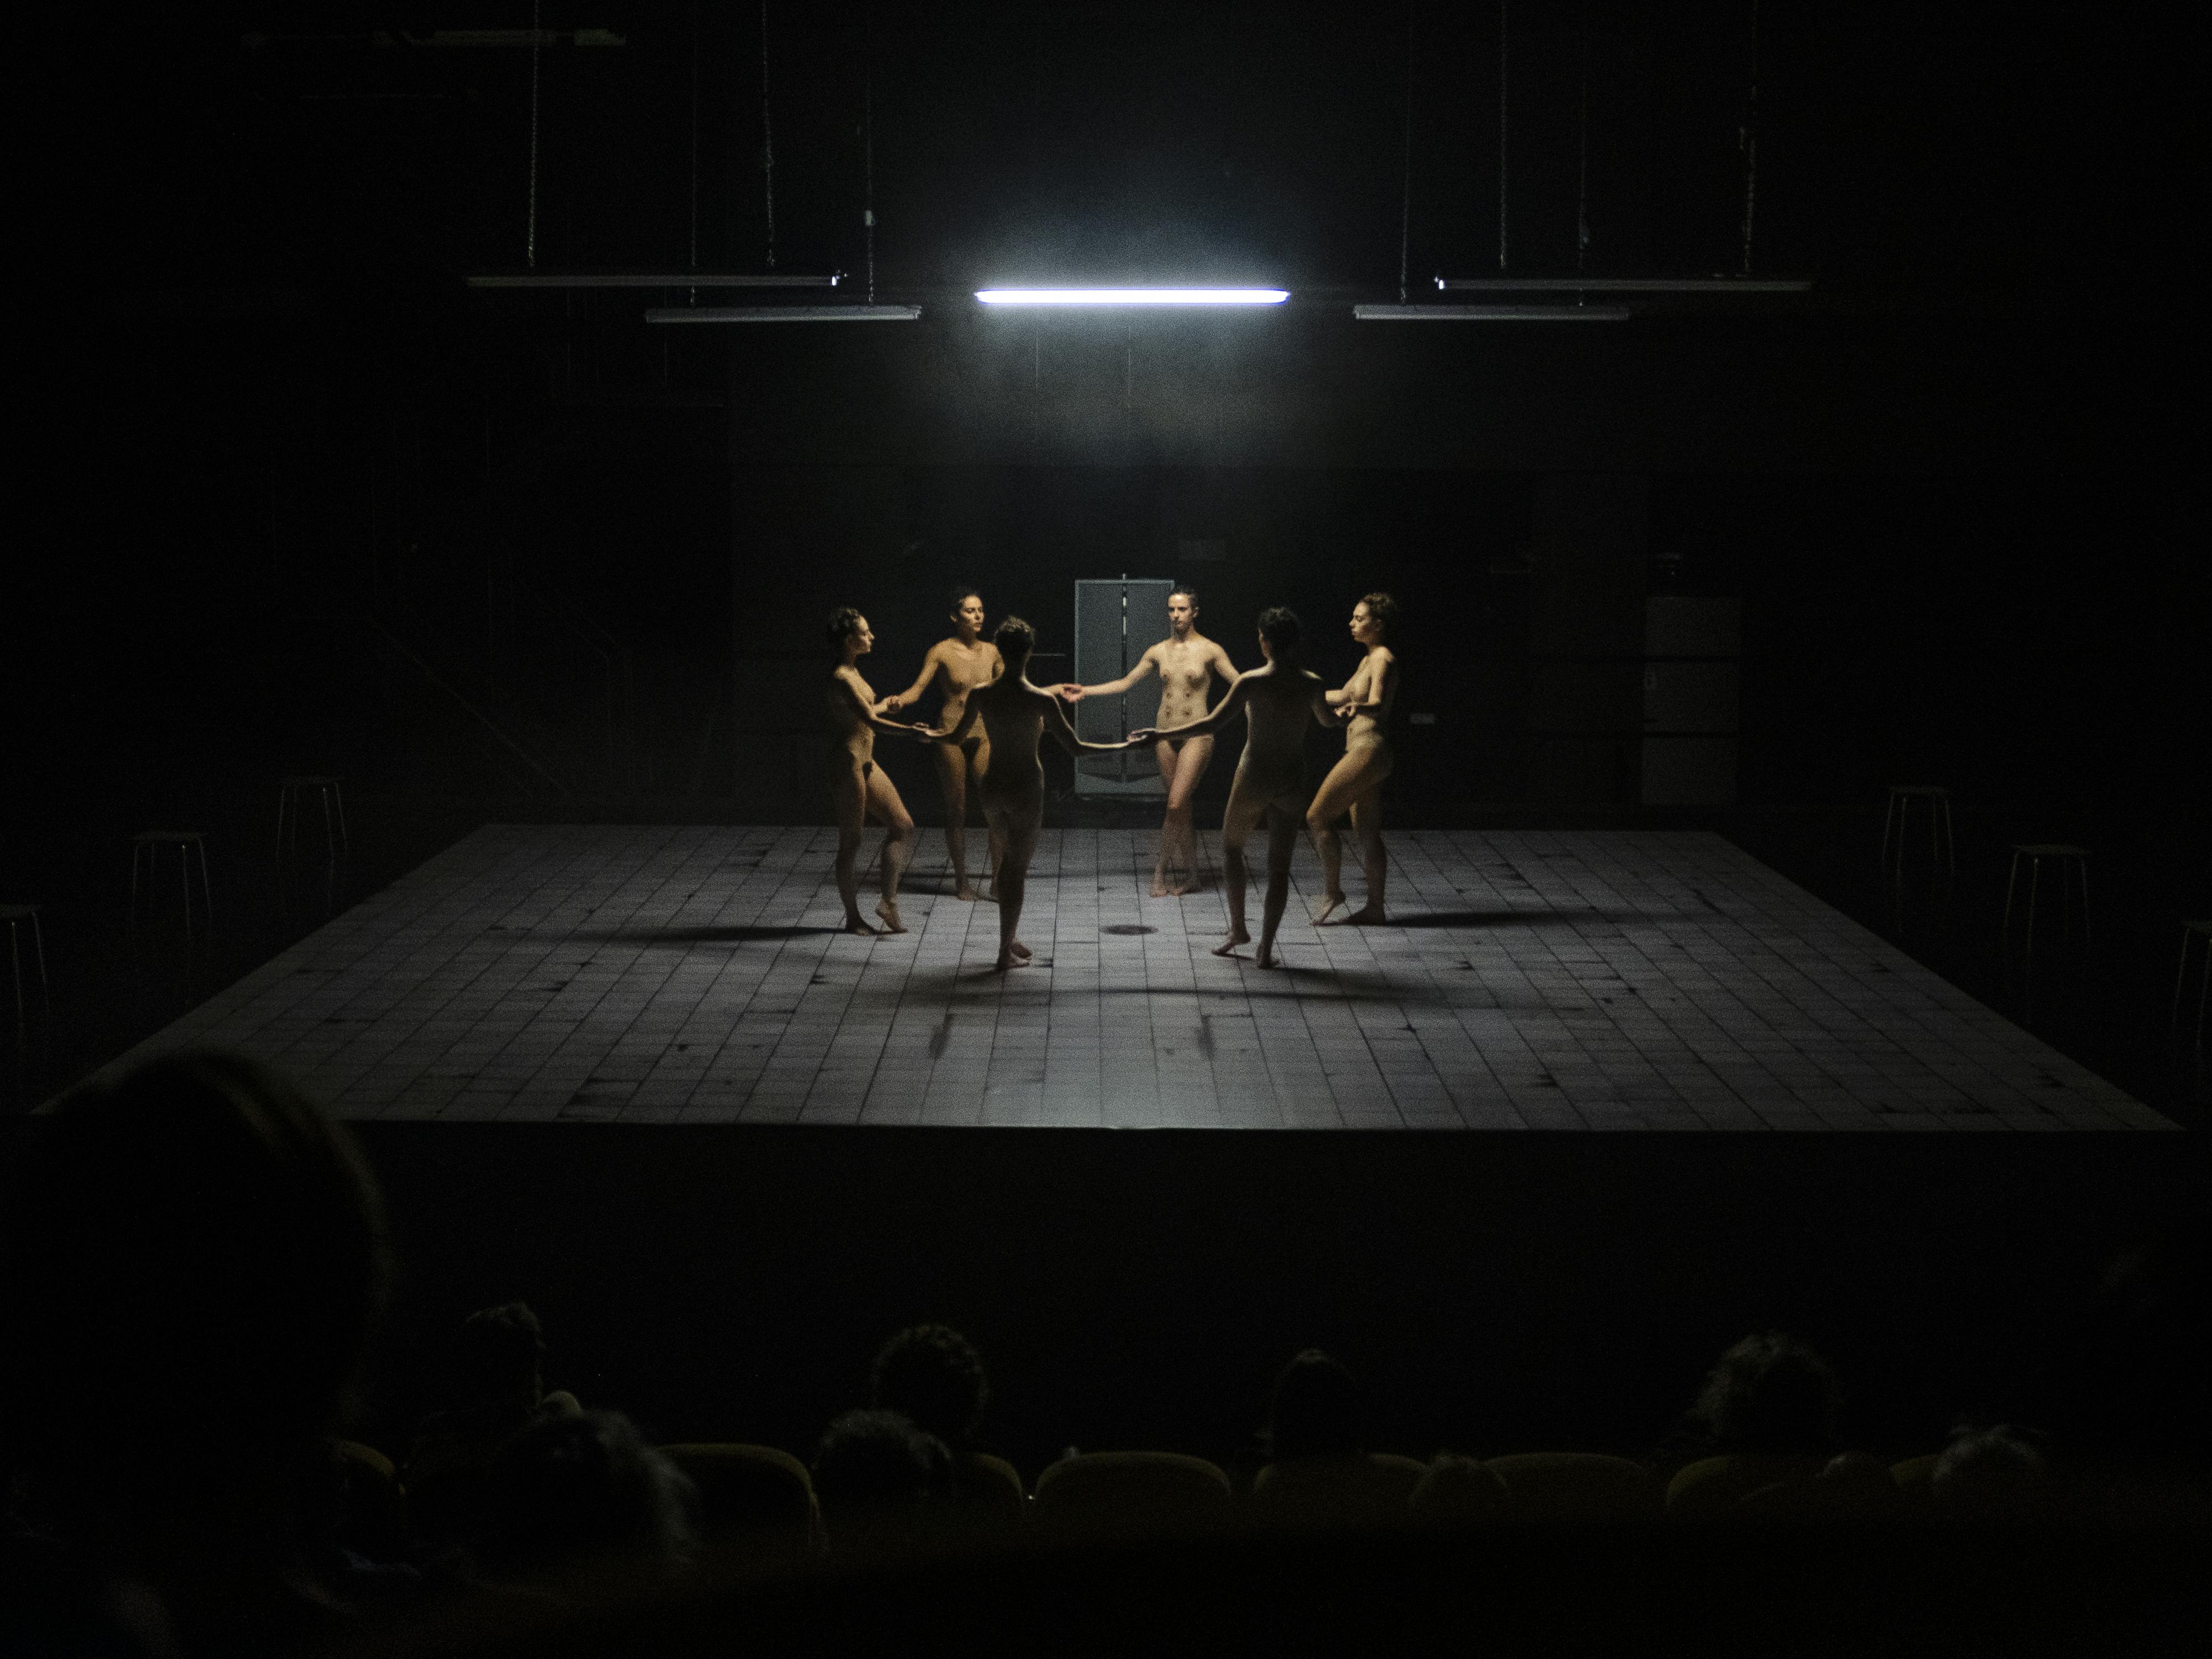 Six female dancers, apparently naked, form a circle on the empty stage. A neon light from above illuminates them.